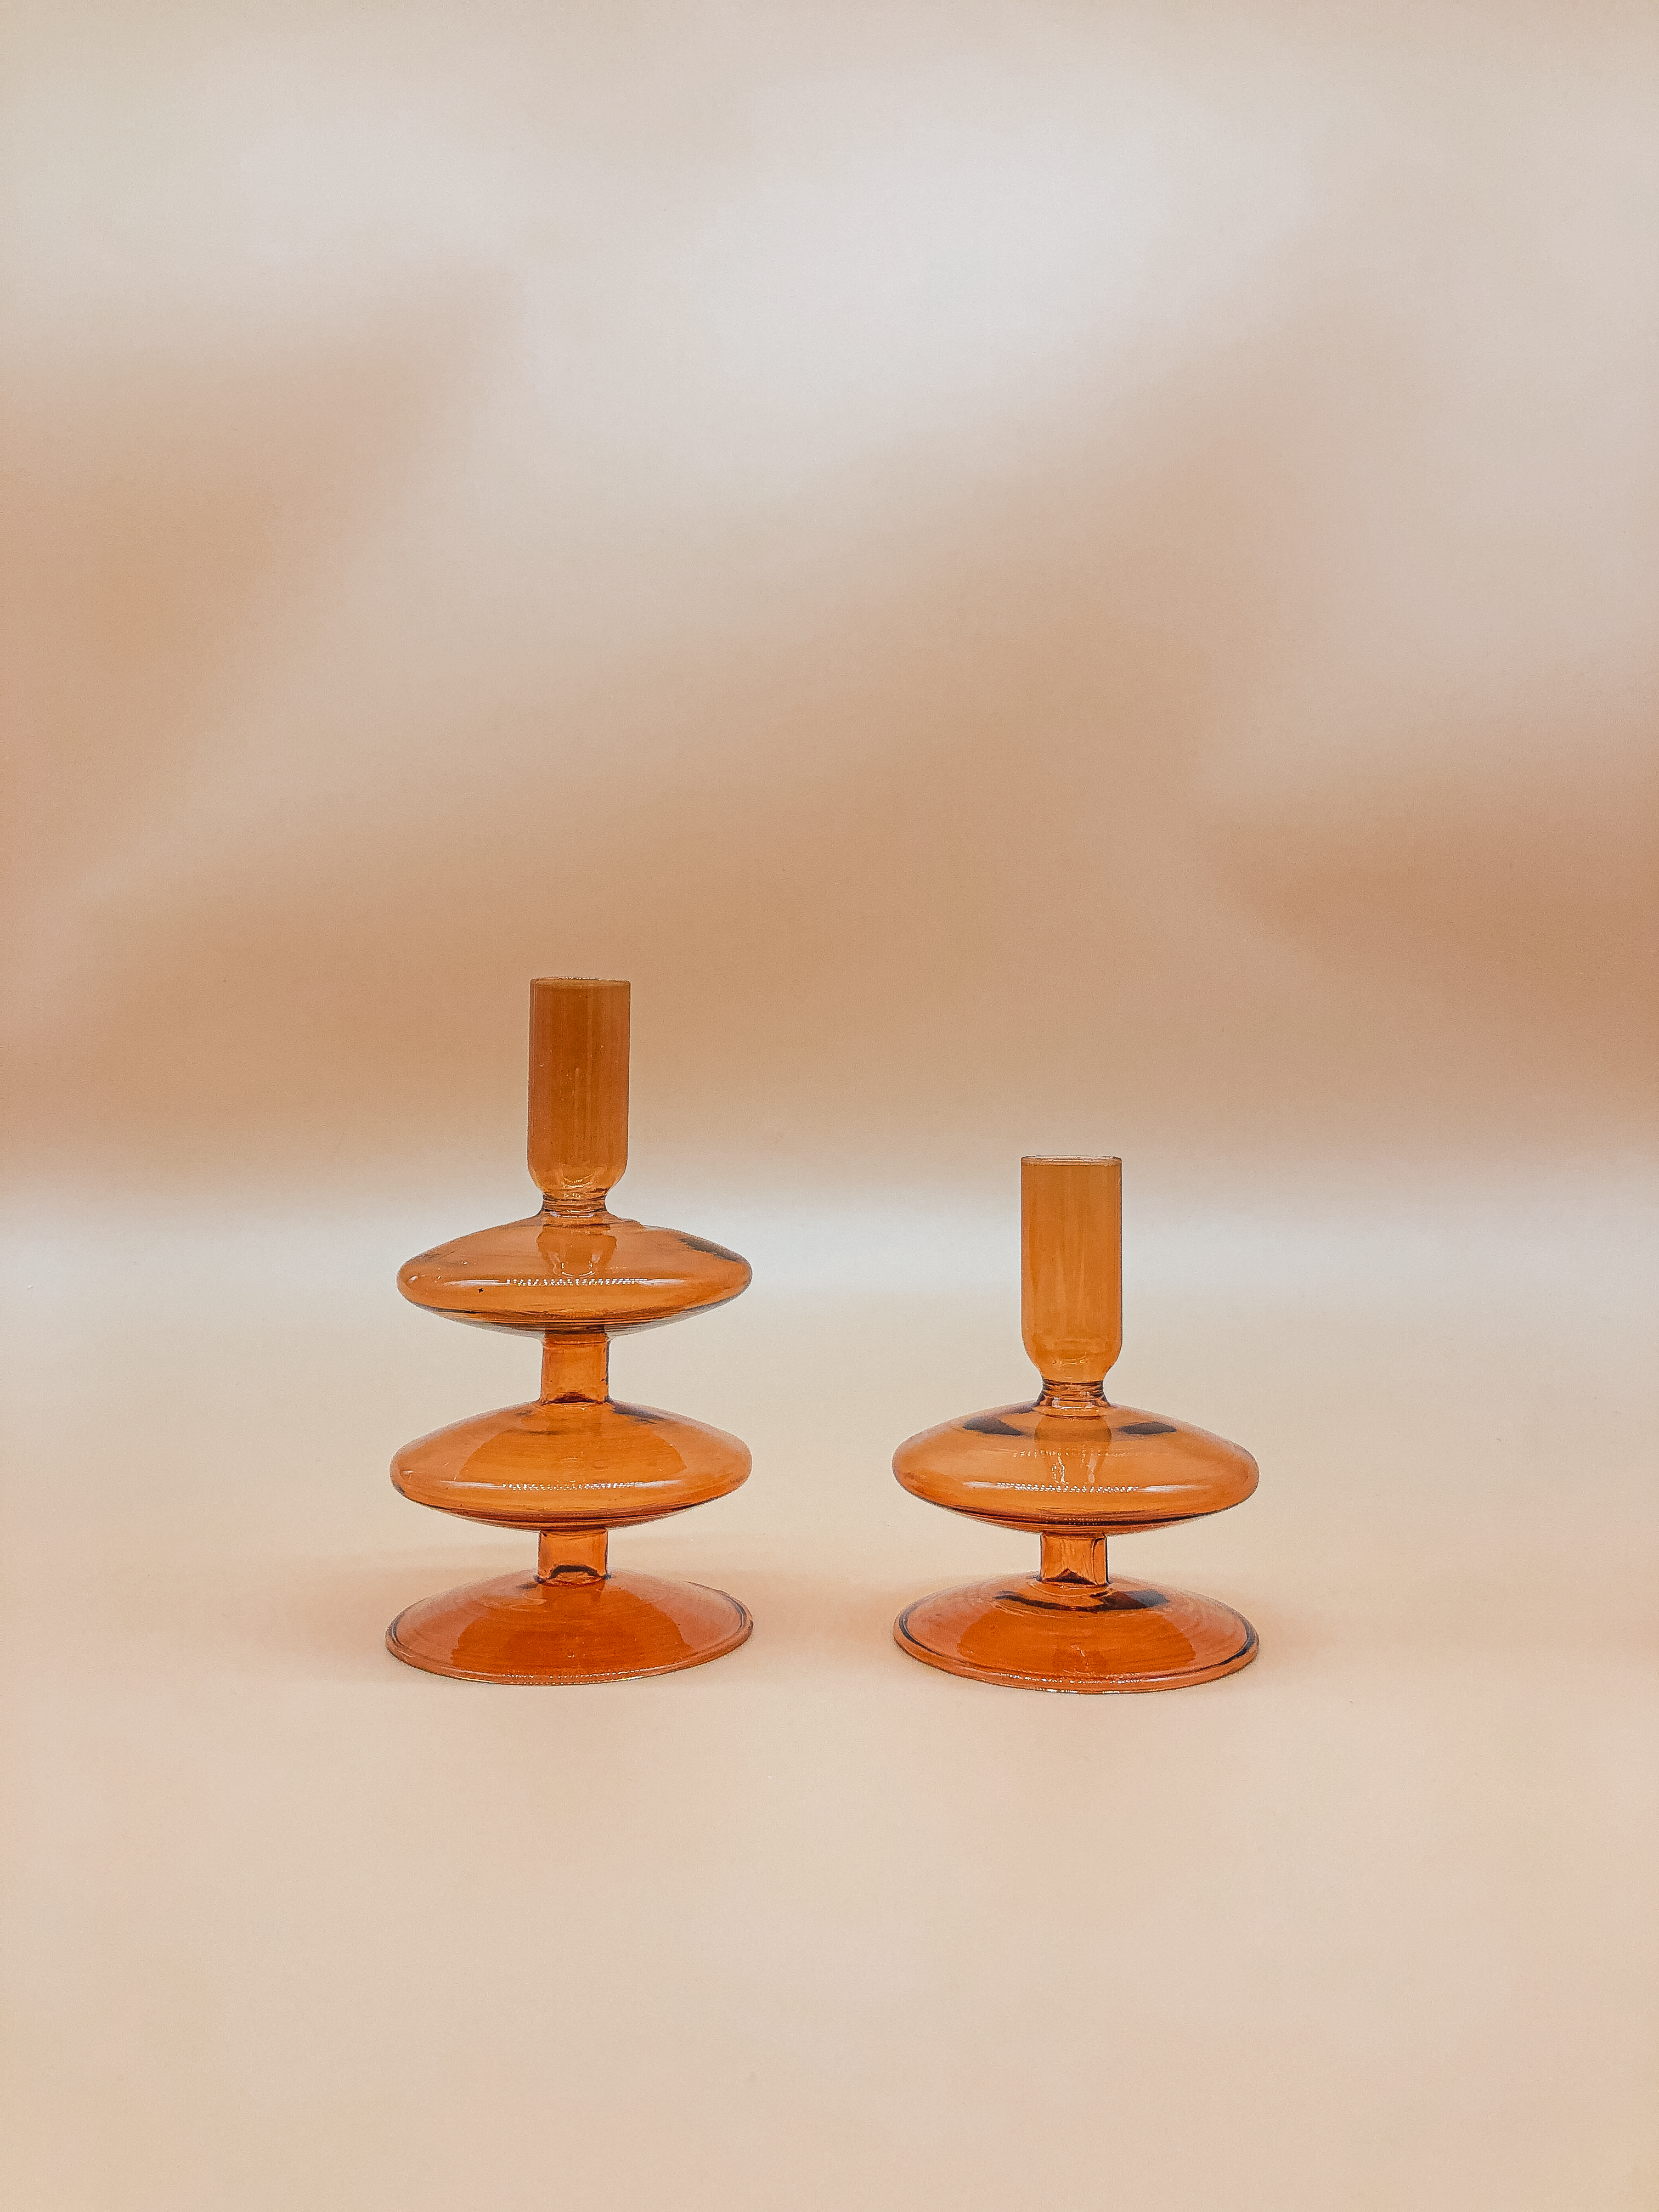 Single Decker Candle Holder in Amber by PROSE Décor